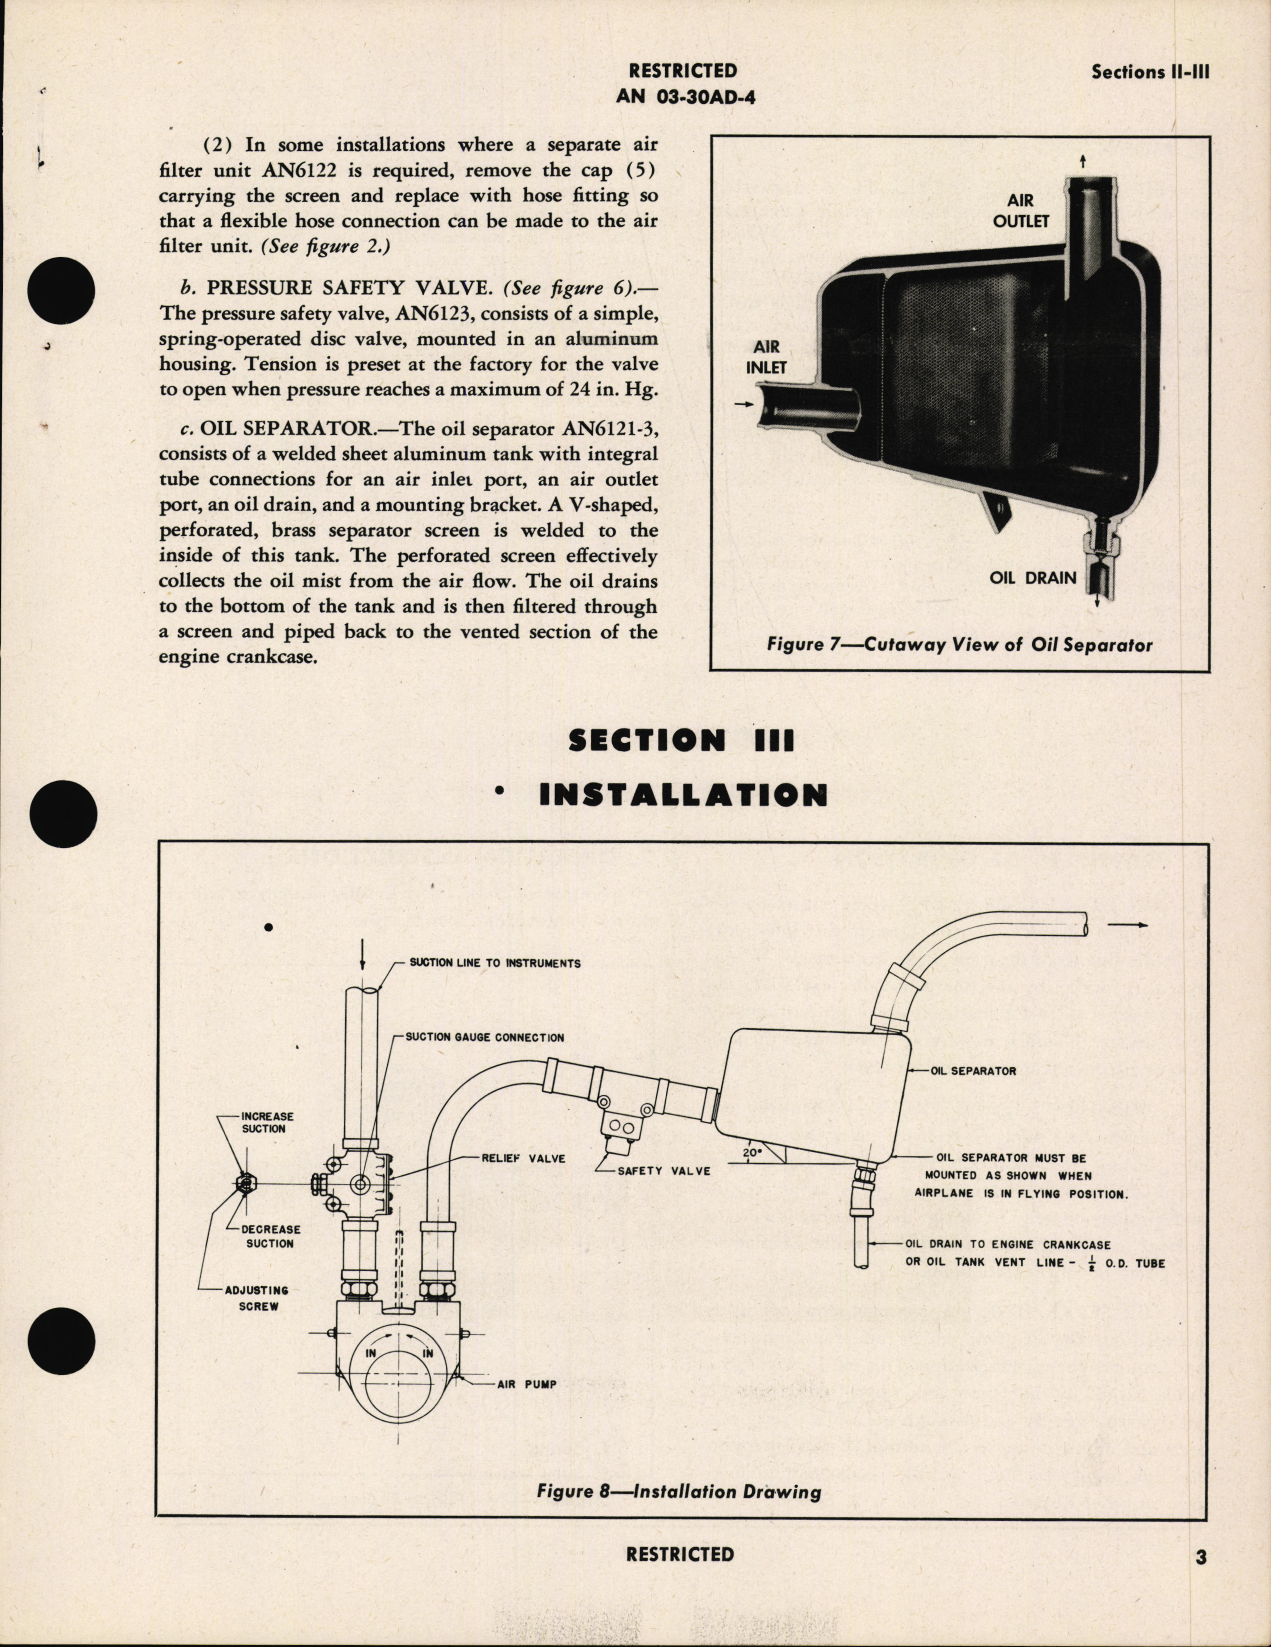 Sample page 7 from AirCorps Library document: Handbook of Instructions with Parts Catalog for Relief Valves, Safety Valve, and Oil Separator